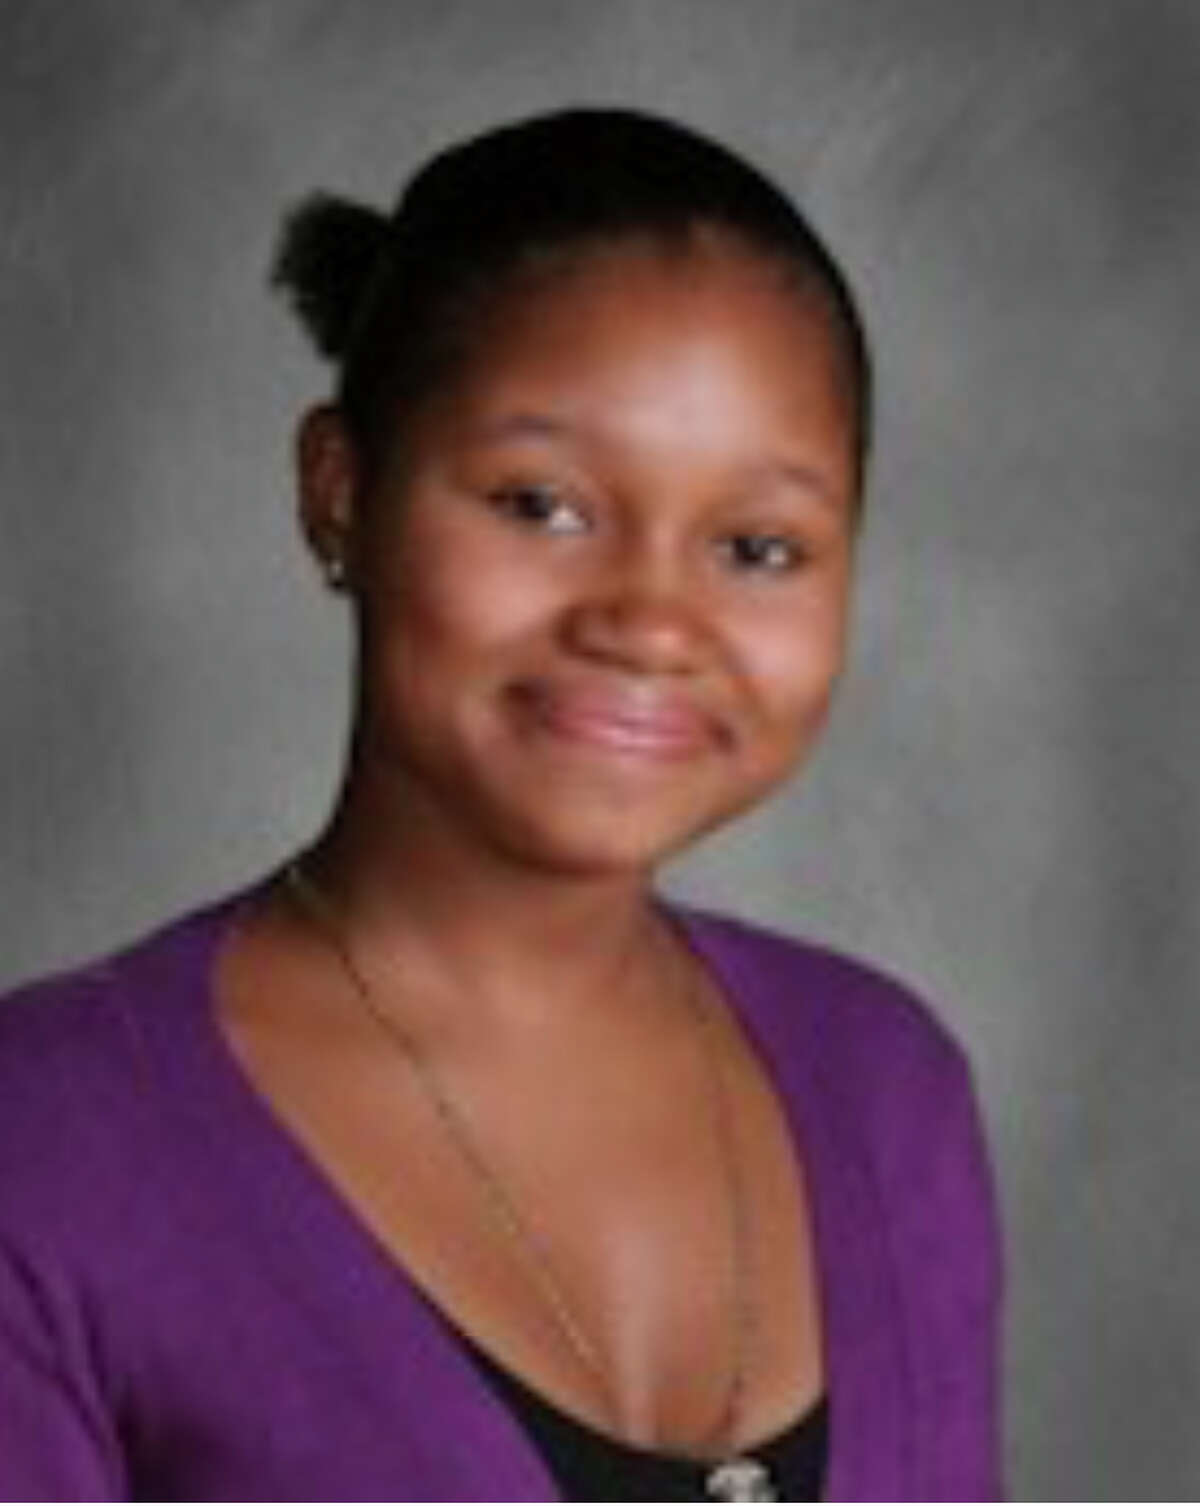 Greenwich police are searching for 15-year-old Crystyle Davis, a Greenwich girl who was last seen in town Friday, July 13, 2012. Davis is described as a 4-foot-11, 107-pound black female with brown hair extensions in the back of her head. She may be wearing brown moccasin shoes. She has run away from home before, police said.